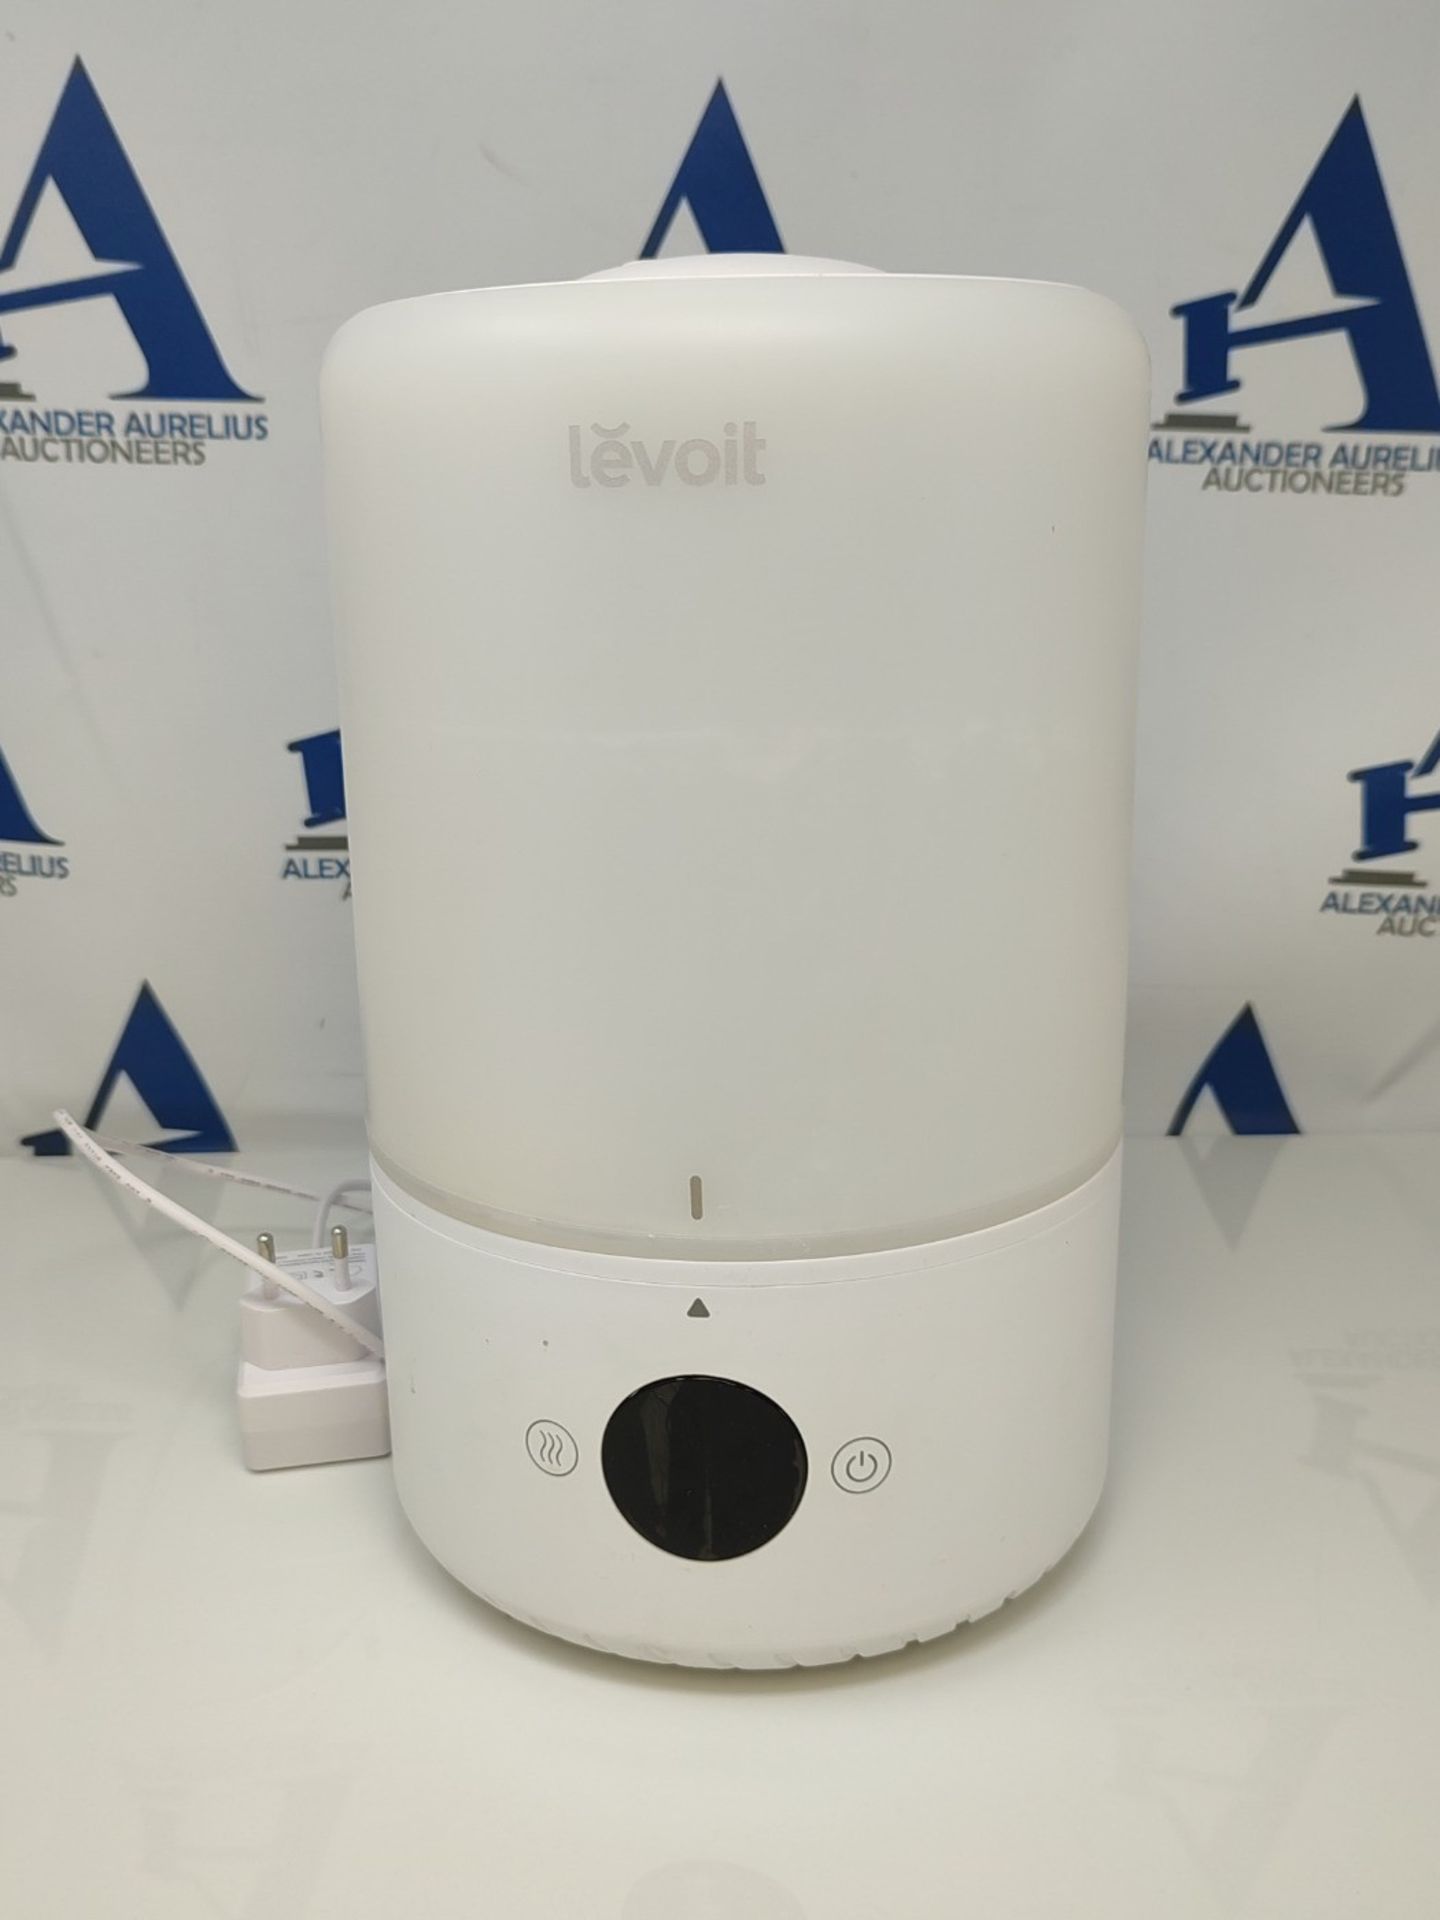 RRP £69.00 LEVOIT 3L Top Fill Humidifier, 360° Rotatable Nozzle Cool Mist Humidifier, 300 ml/H M - Image 2 of 3